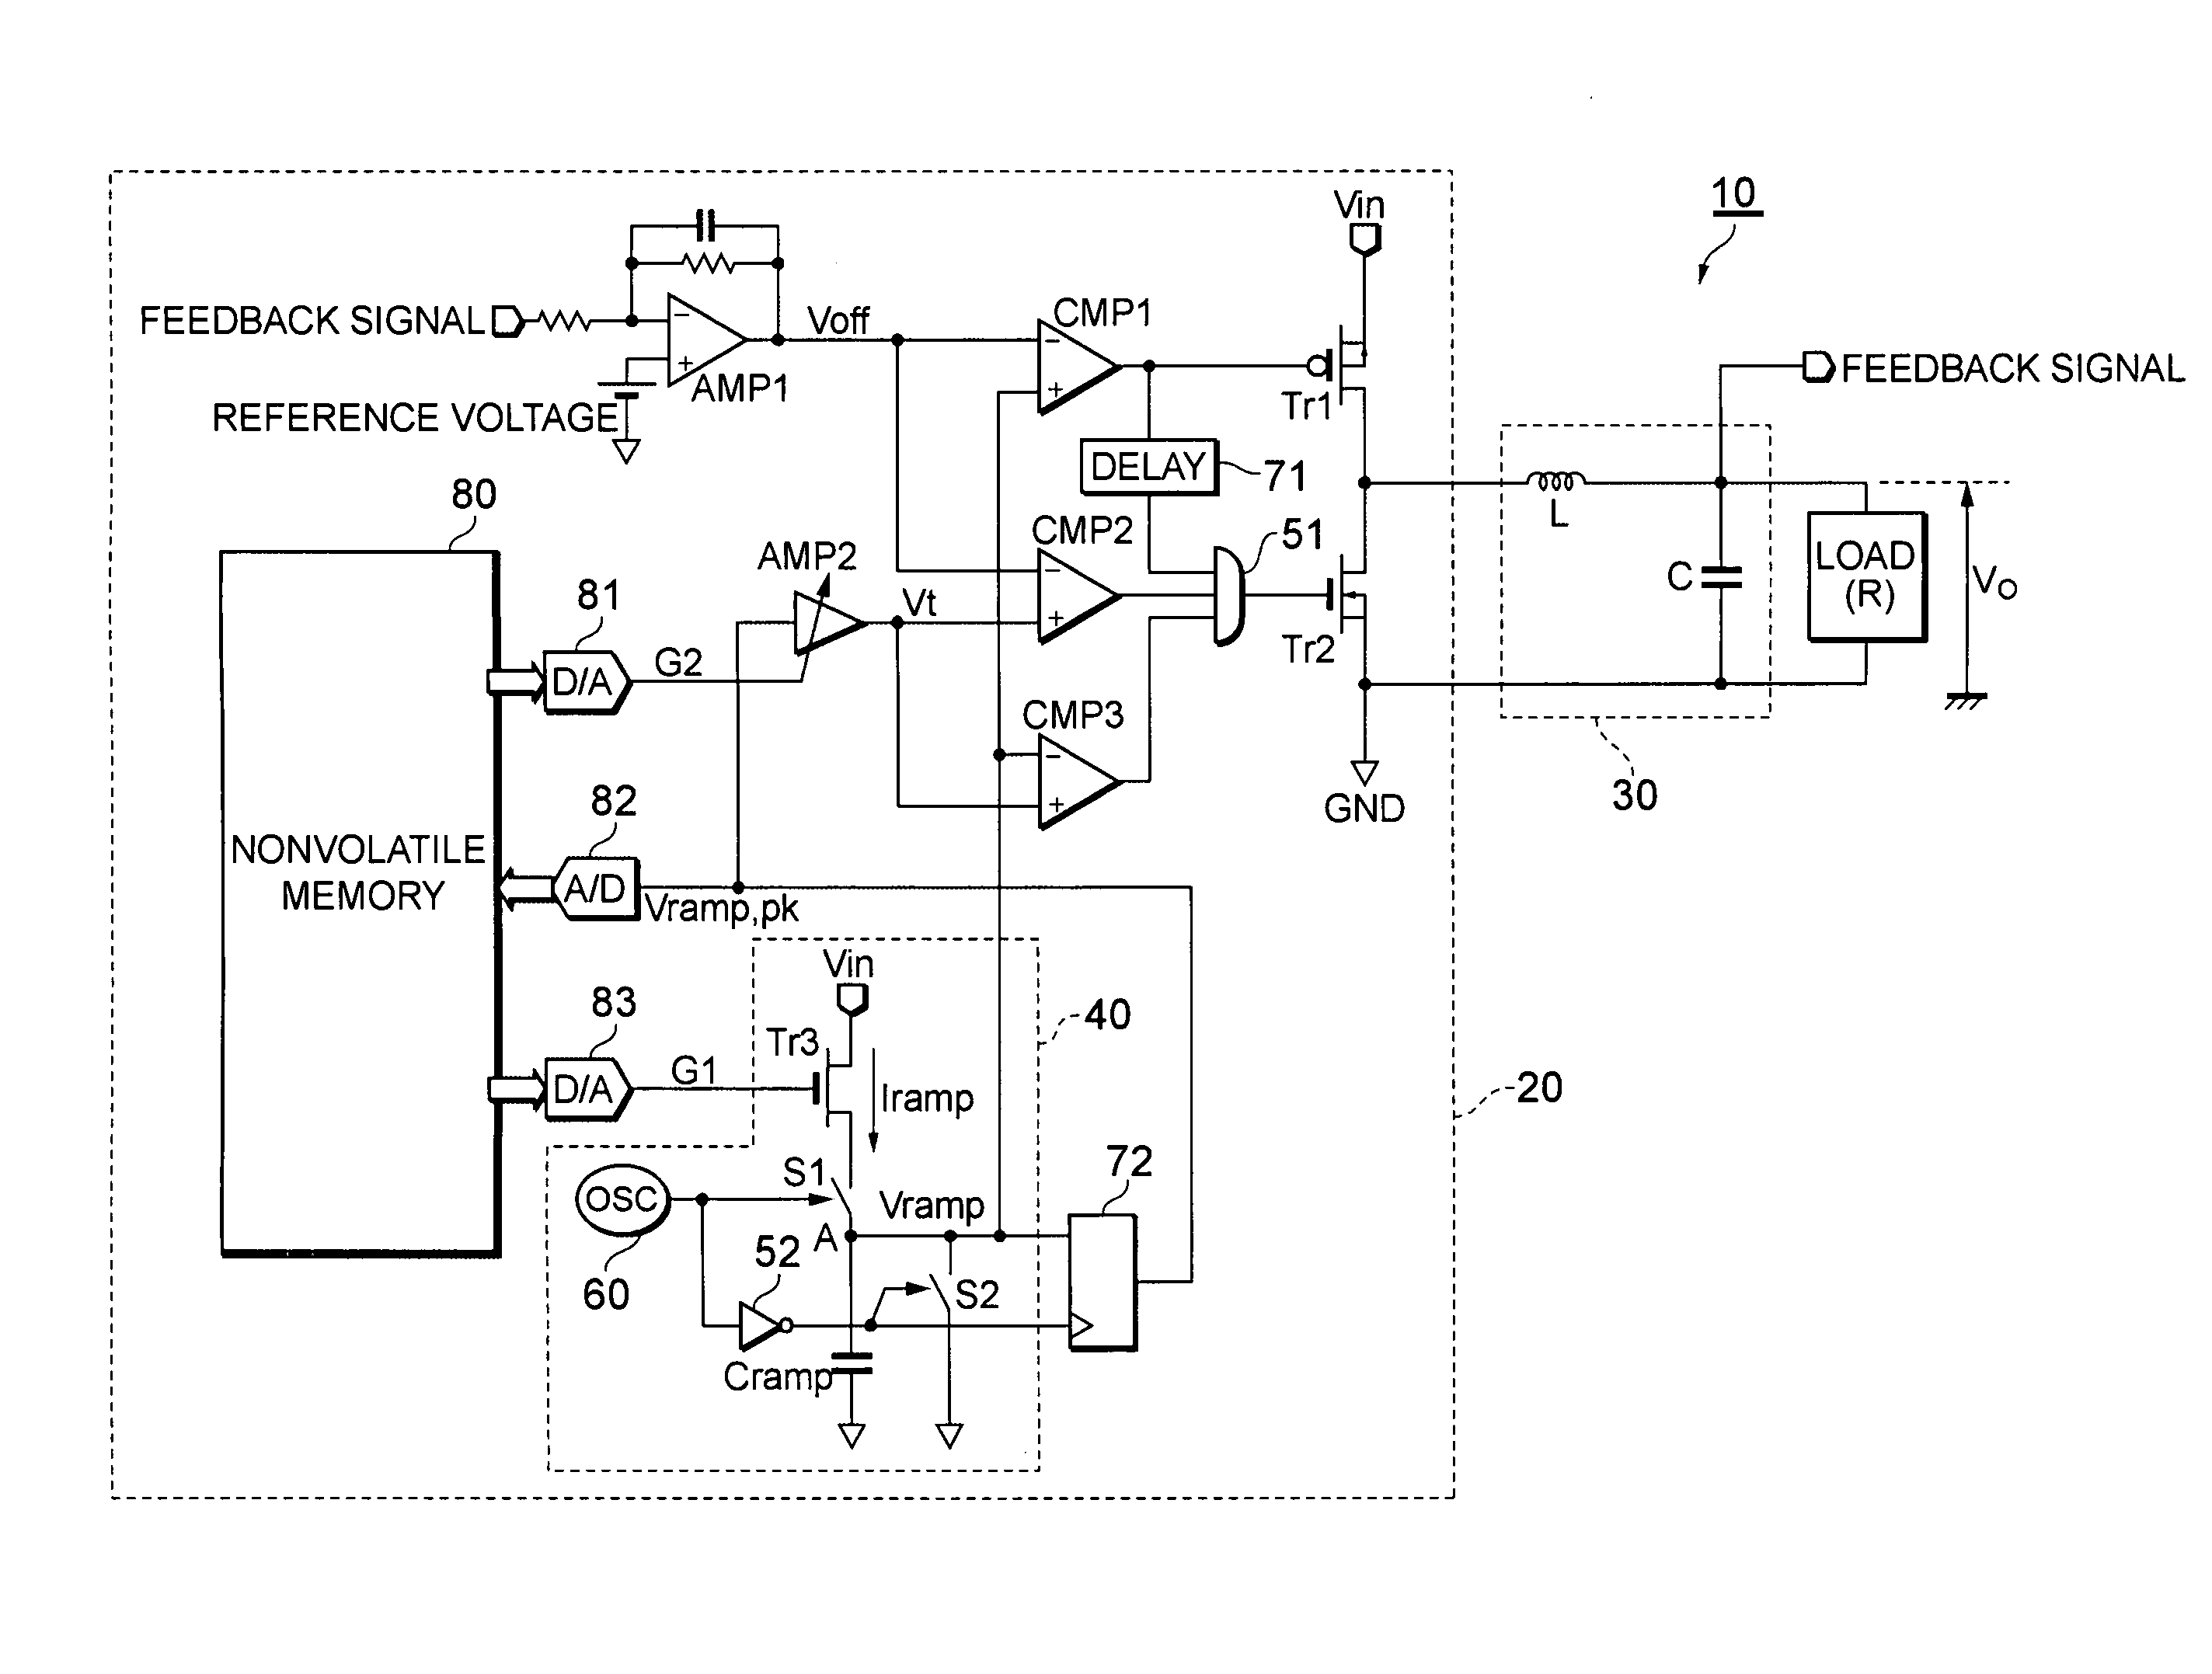 Synchronous rectifying DC-DC converter